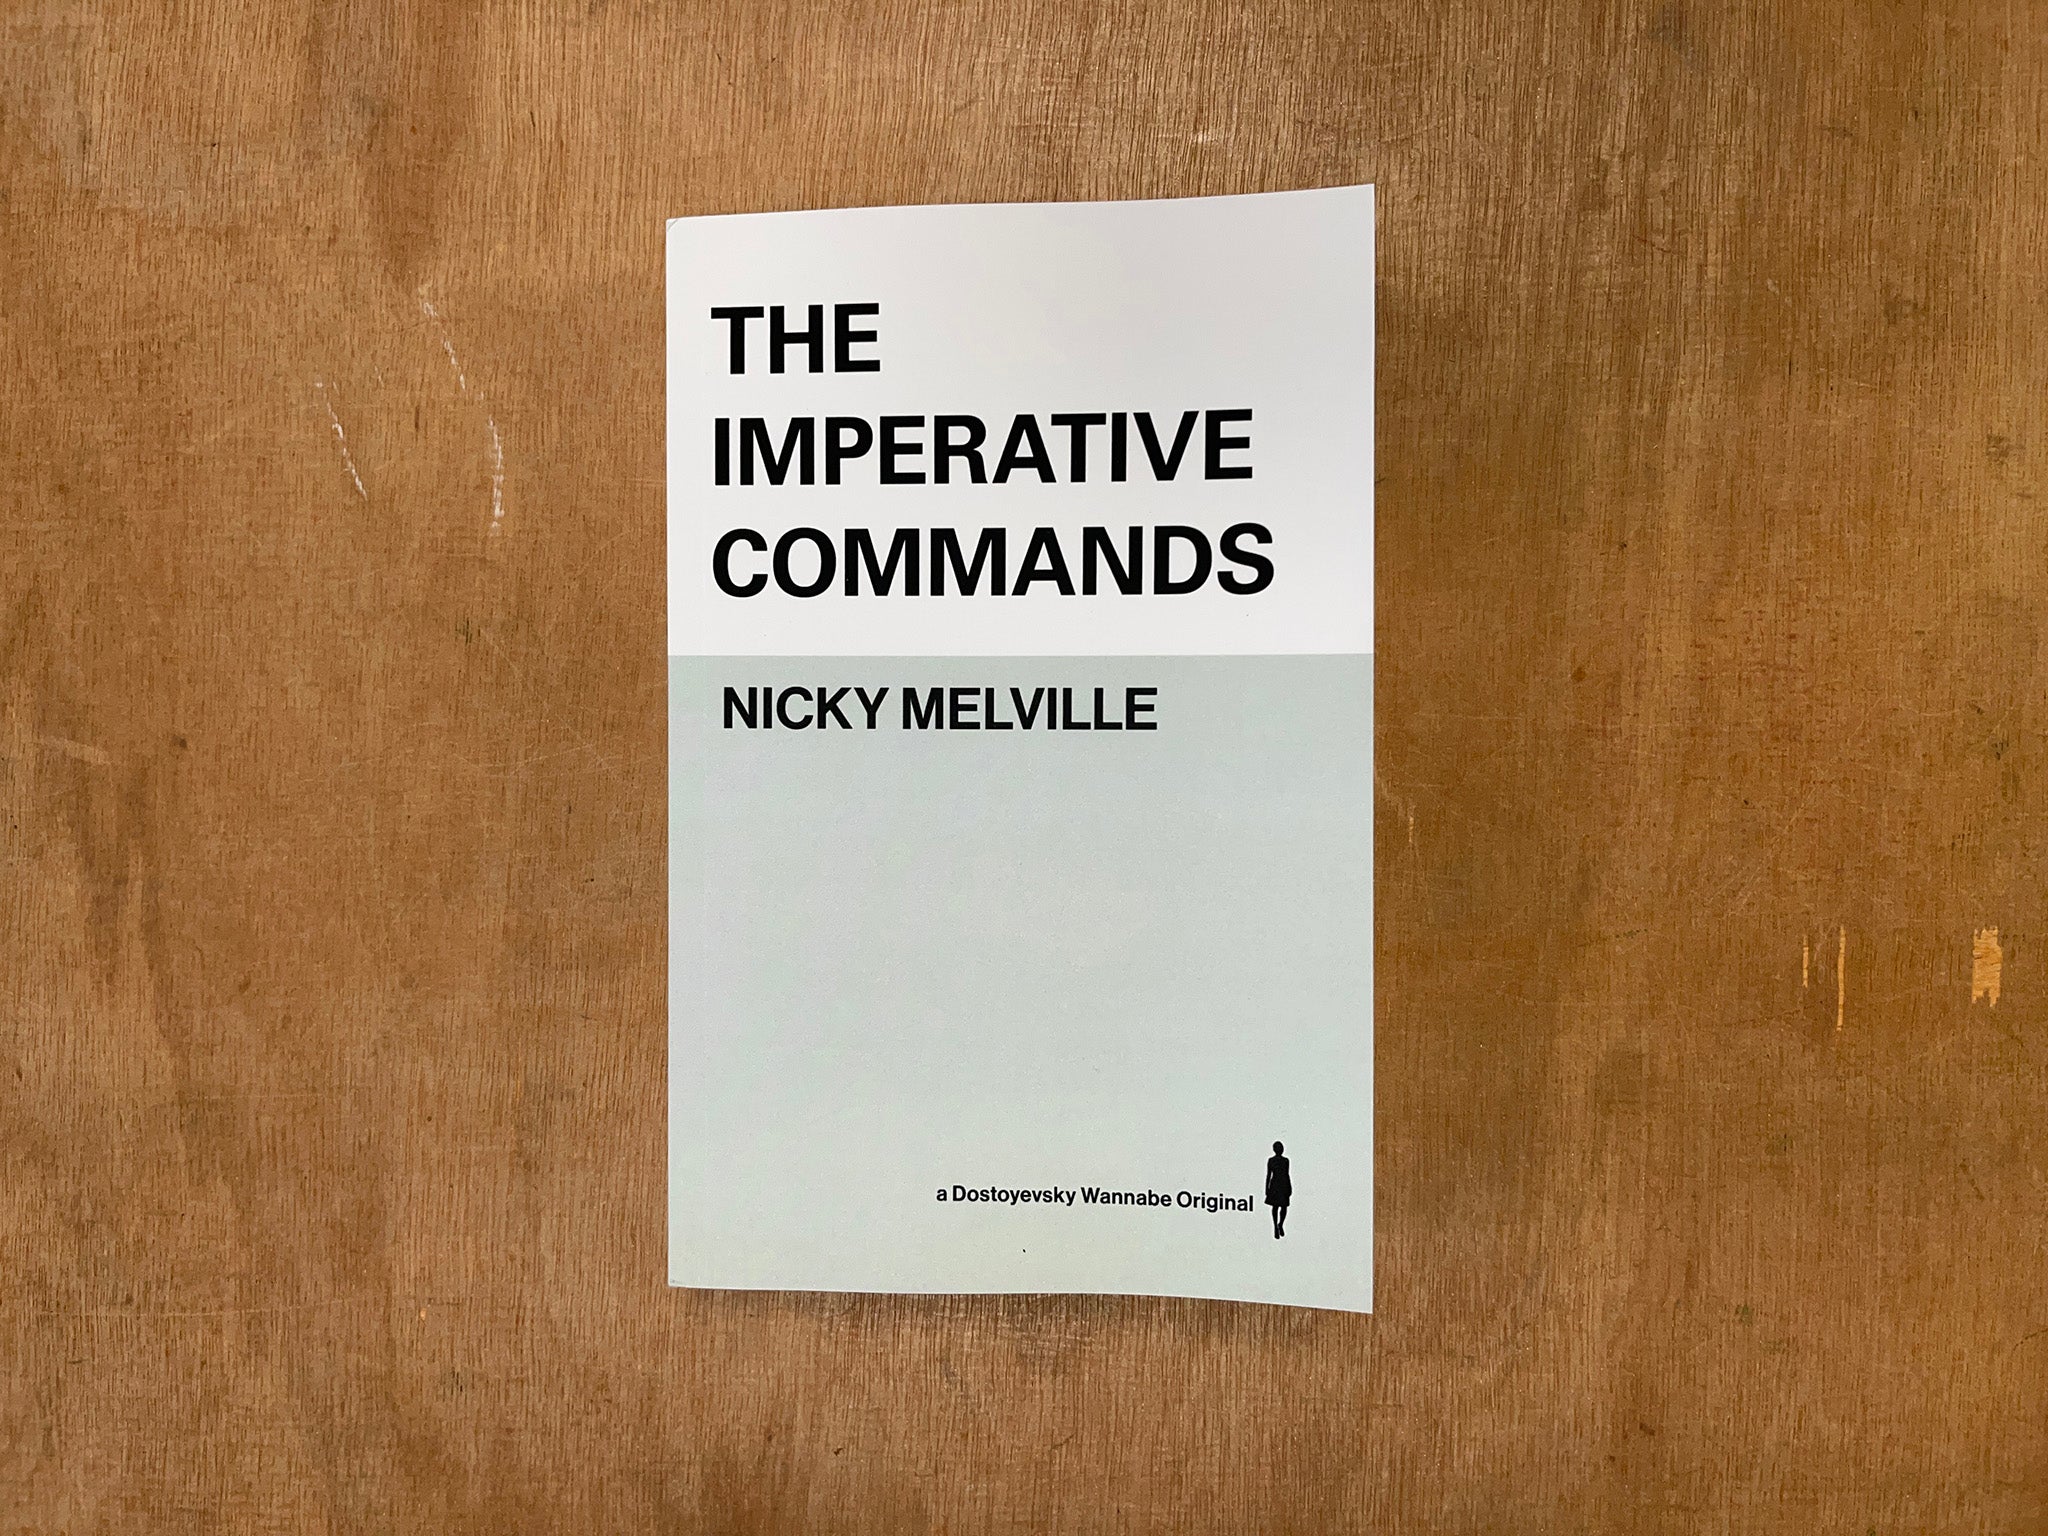 THE IMPERATIVE COMMANDS by Nicky Melville